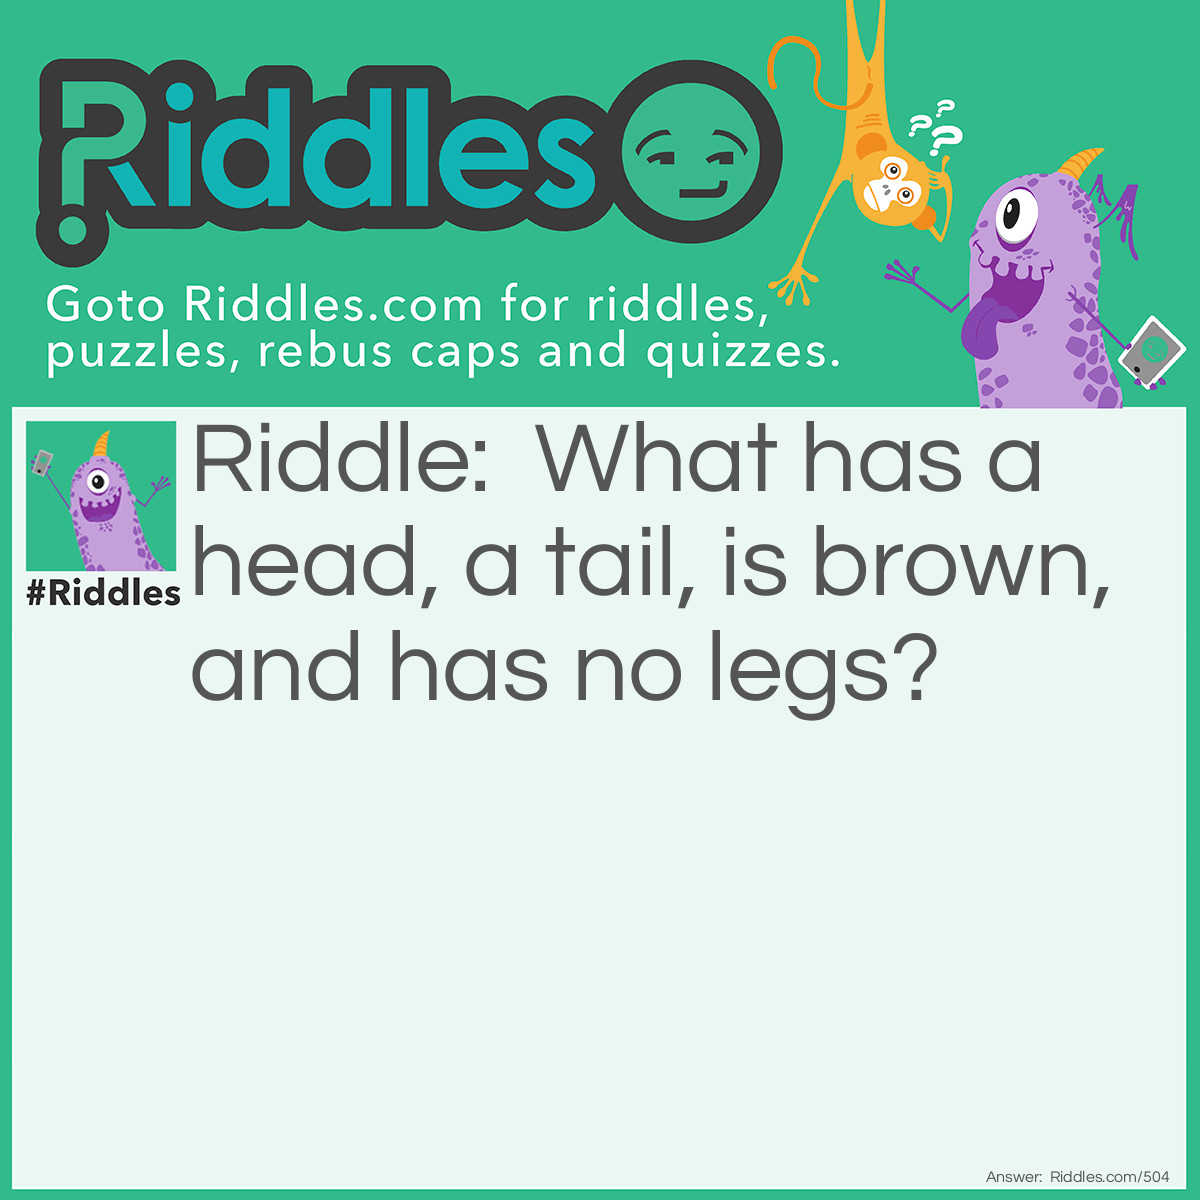 Riddle: What has a head, a tail, is brown, and has no legs? Answer: A Penny.